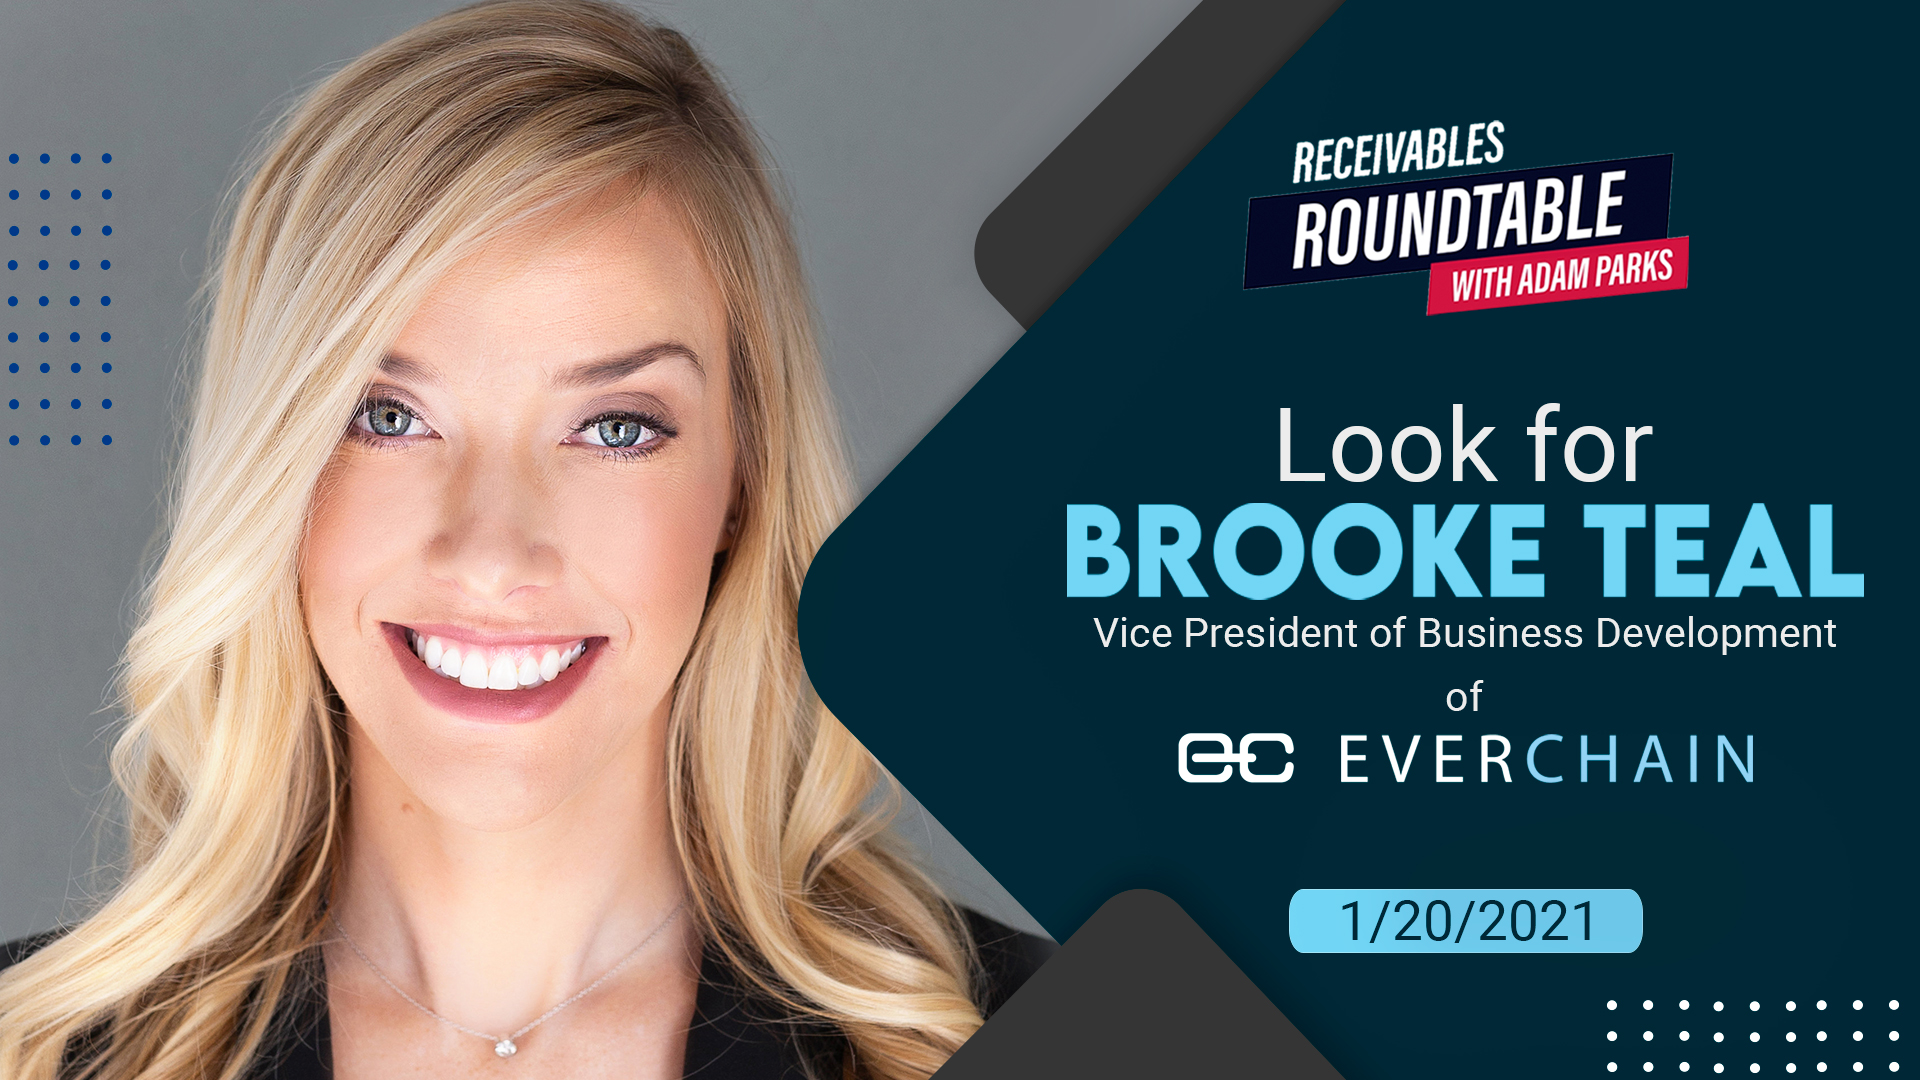 Receivables Roundtable with Adam Parks, Look for Brooke Teal Vice President of Business Development of EverChain